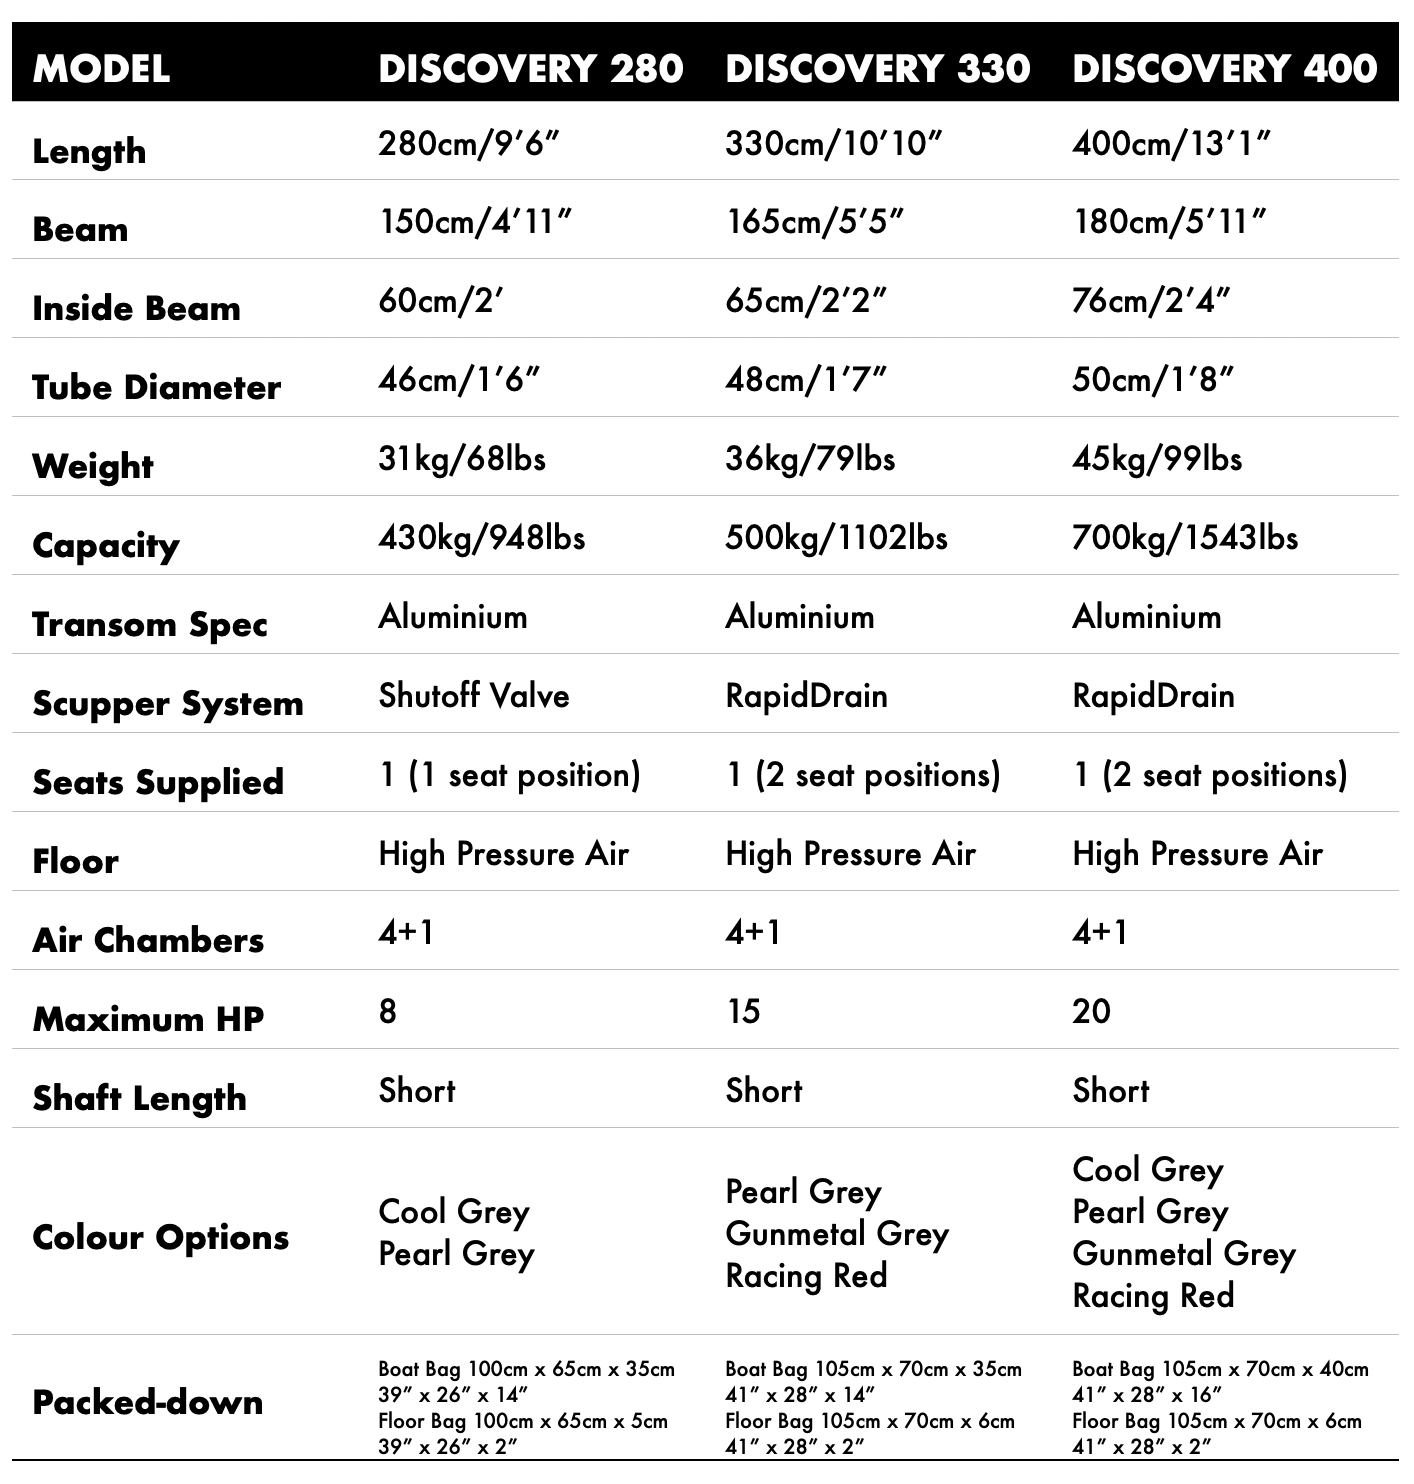 True Kit Discovery Range Specification sheet showing all the details like length, beam, weight, packed down sizes